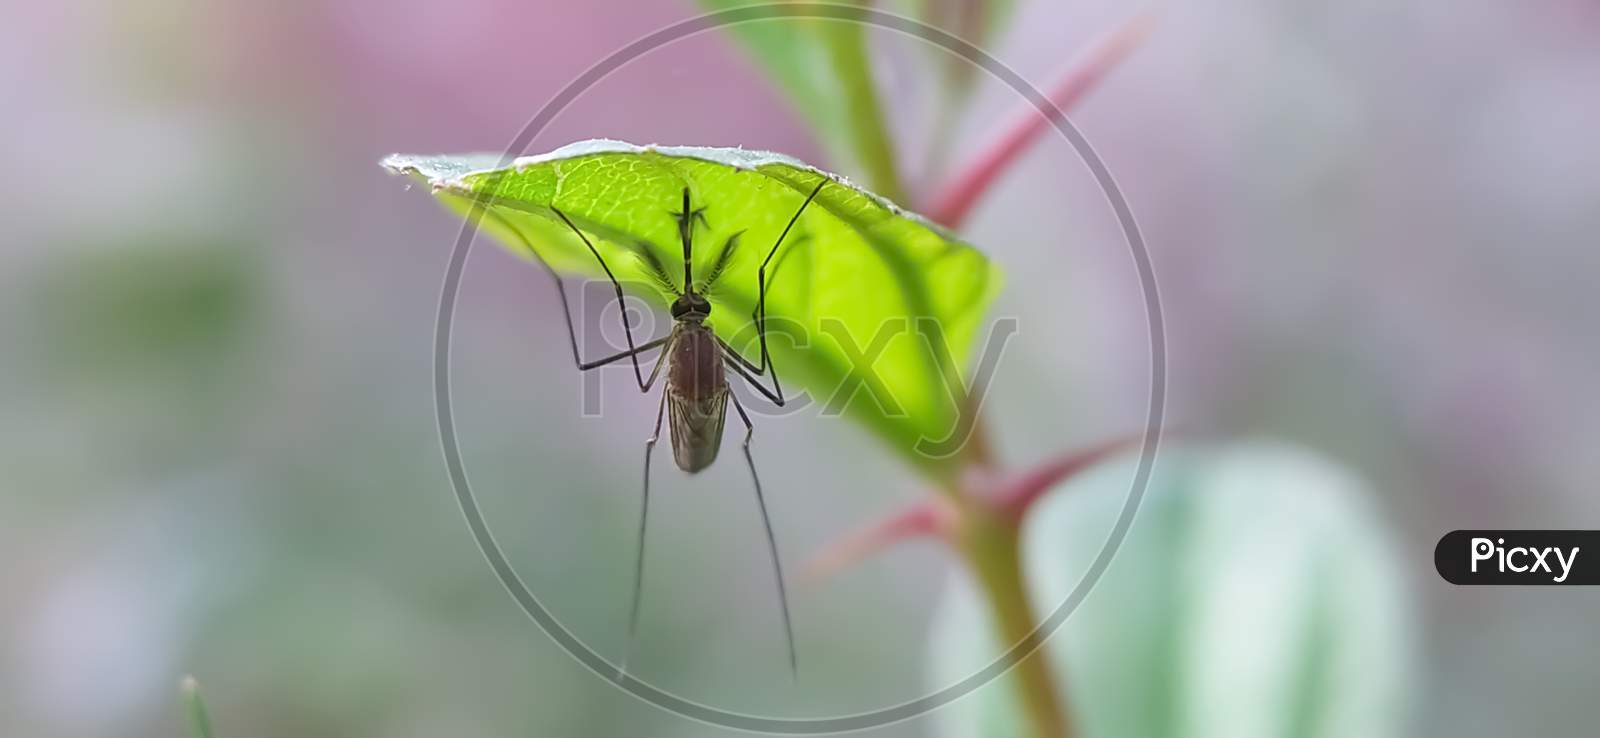 Culex pipiens Insects on leaf in indian village garden image  Mosquitoes image